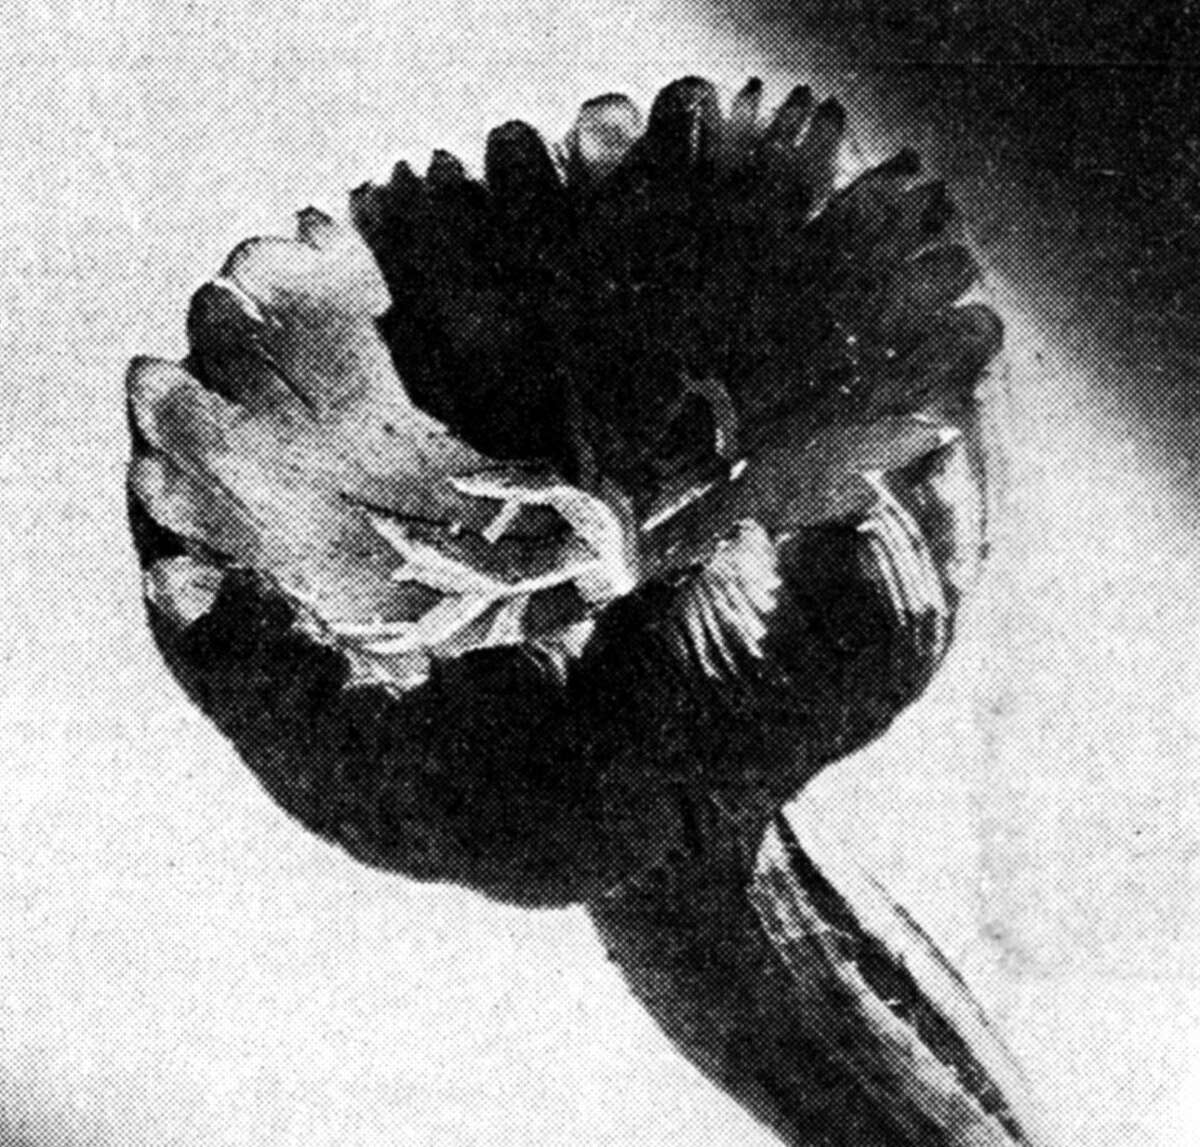 An oak stump mushroom was found by Mrs. Stanley Nowicki near her home in Parkdale. Usually these mushrooms are not found until early fall, but through a particular weather combination, the above mushroom along with others reported are being found at this early date. The photo was published in the News Advocate on July 10, 1962.